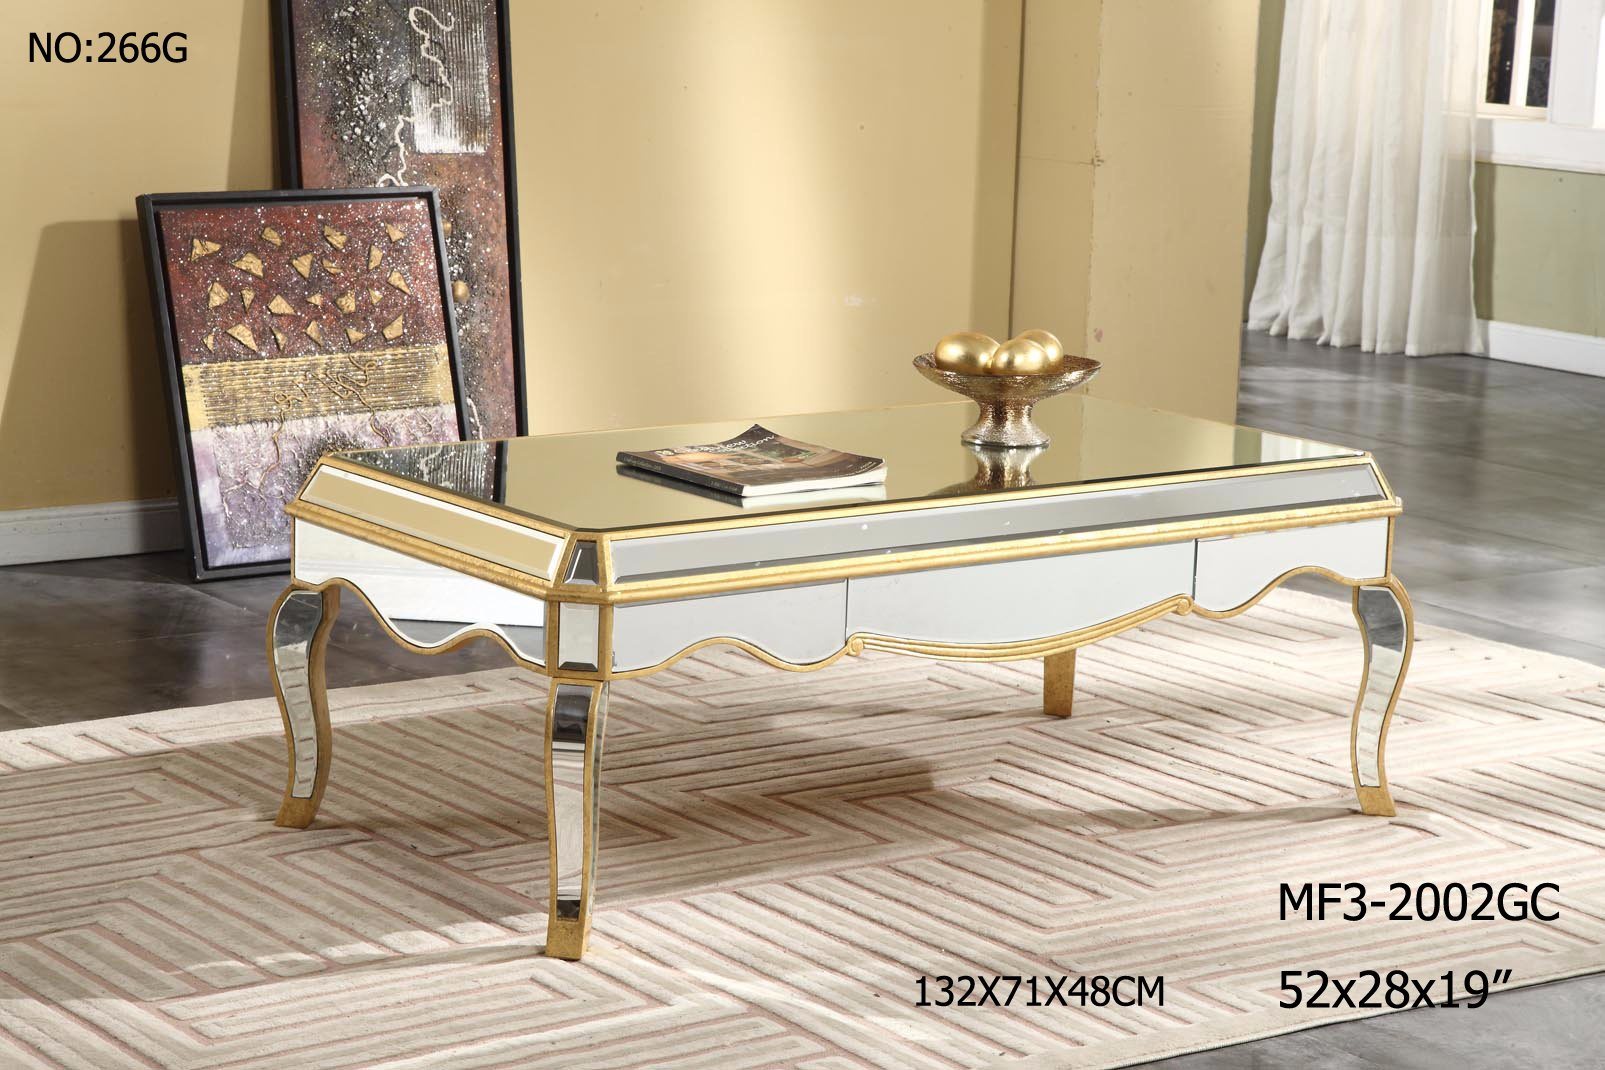 New Customized Mirrored Coffee Table for Hotel